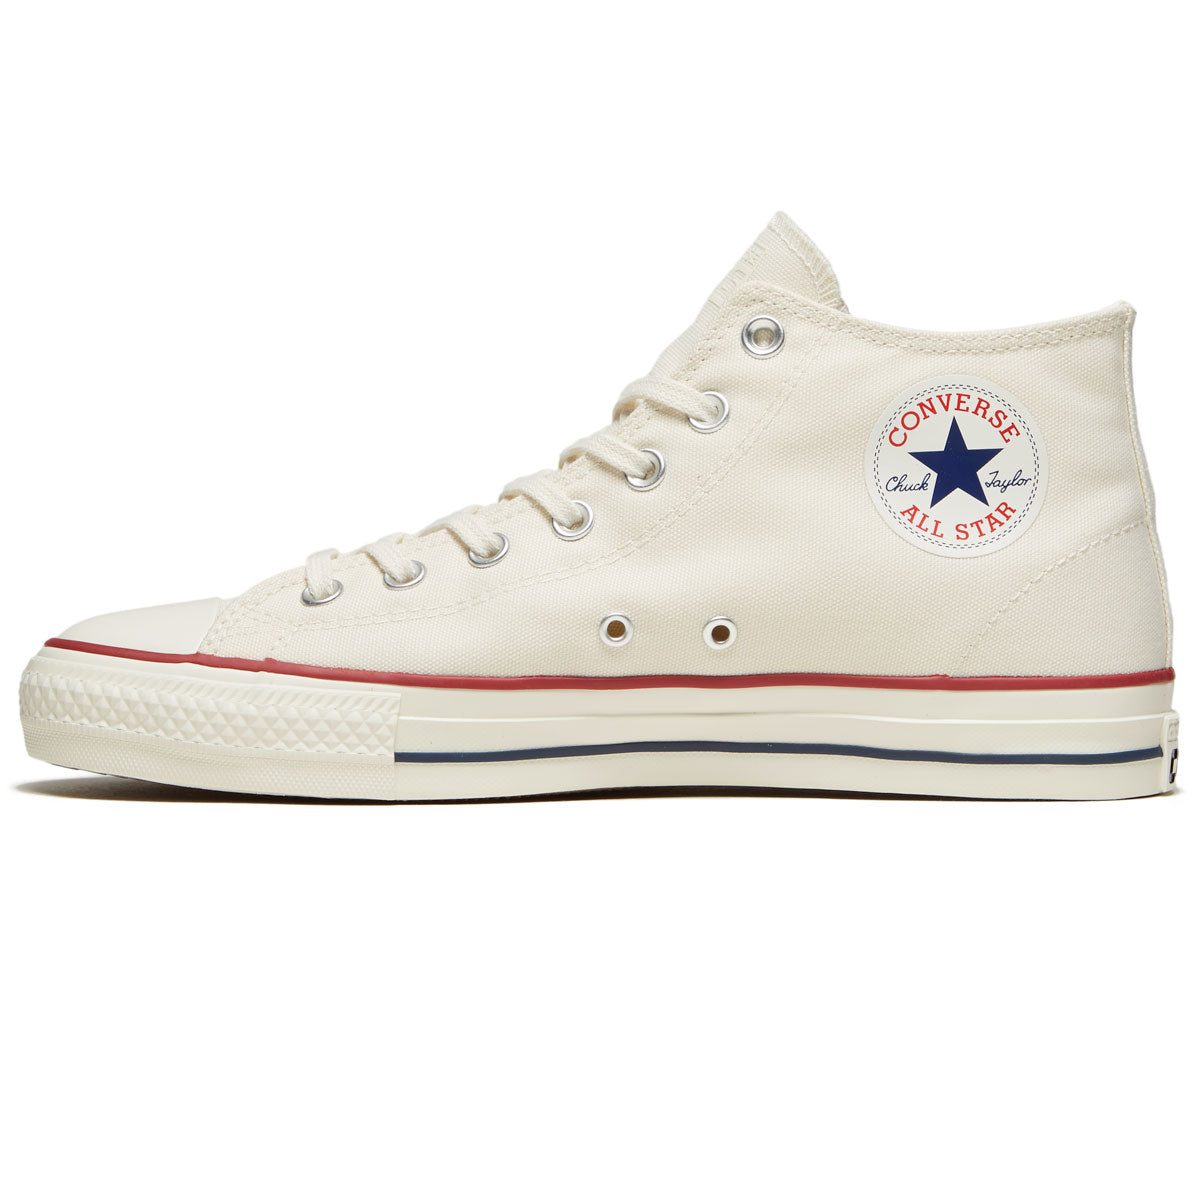 Converse Chuck Taylor All Star Pro Mid Shoes - Egret/Red/Clematis Blue image 2